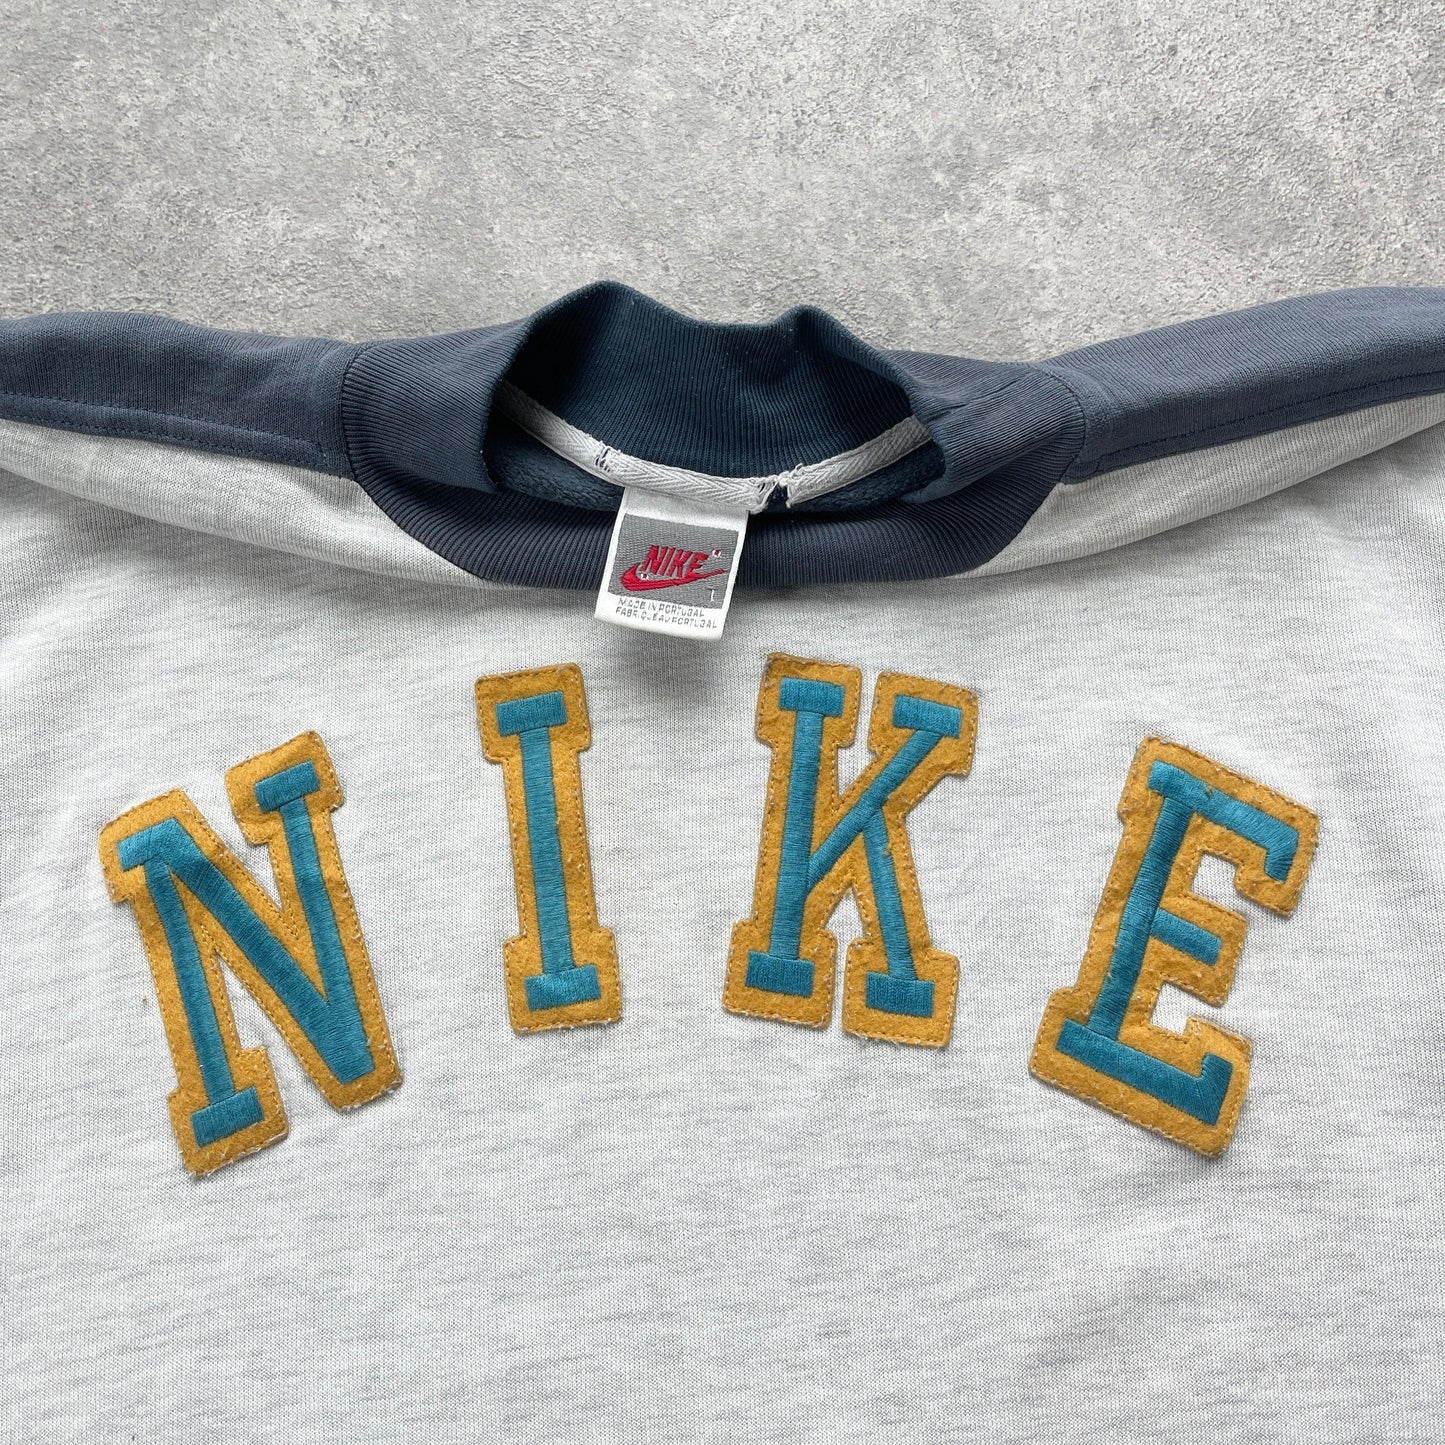 Nike RARE 1990s embroidered spellout sweatshirt (L) - Known Source